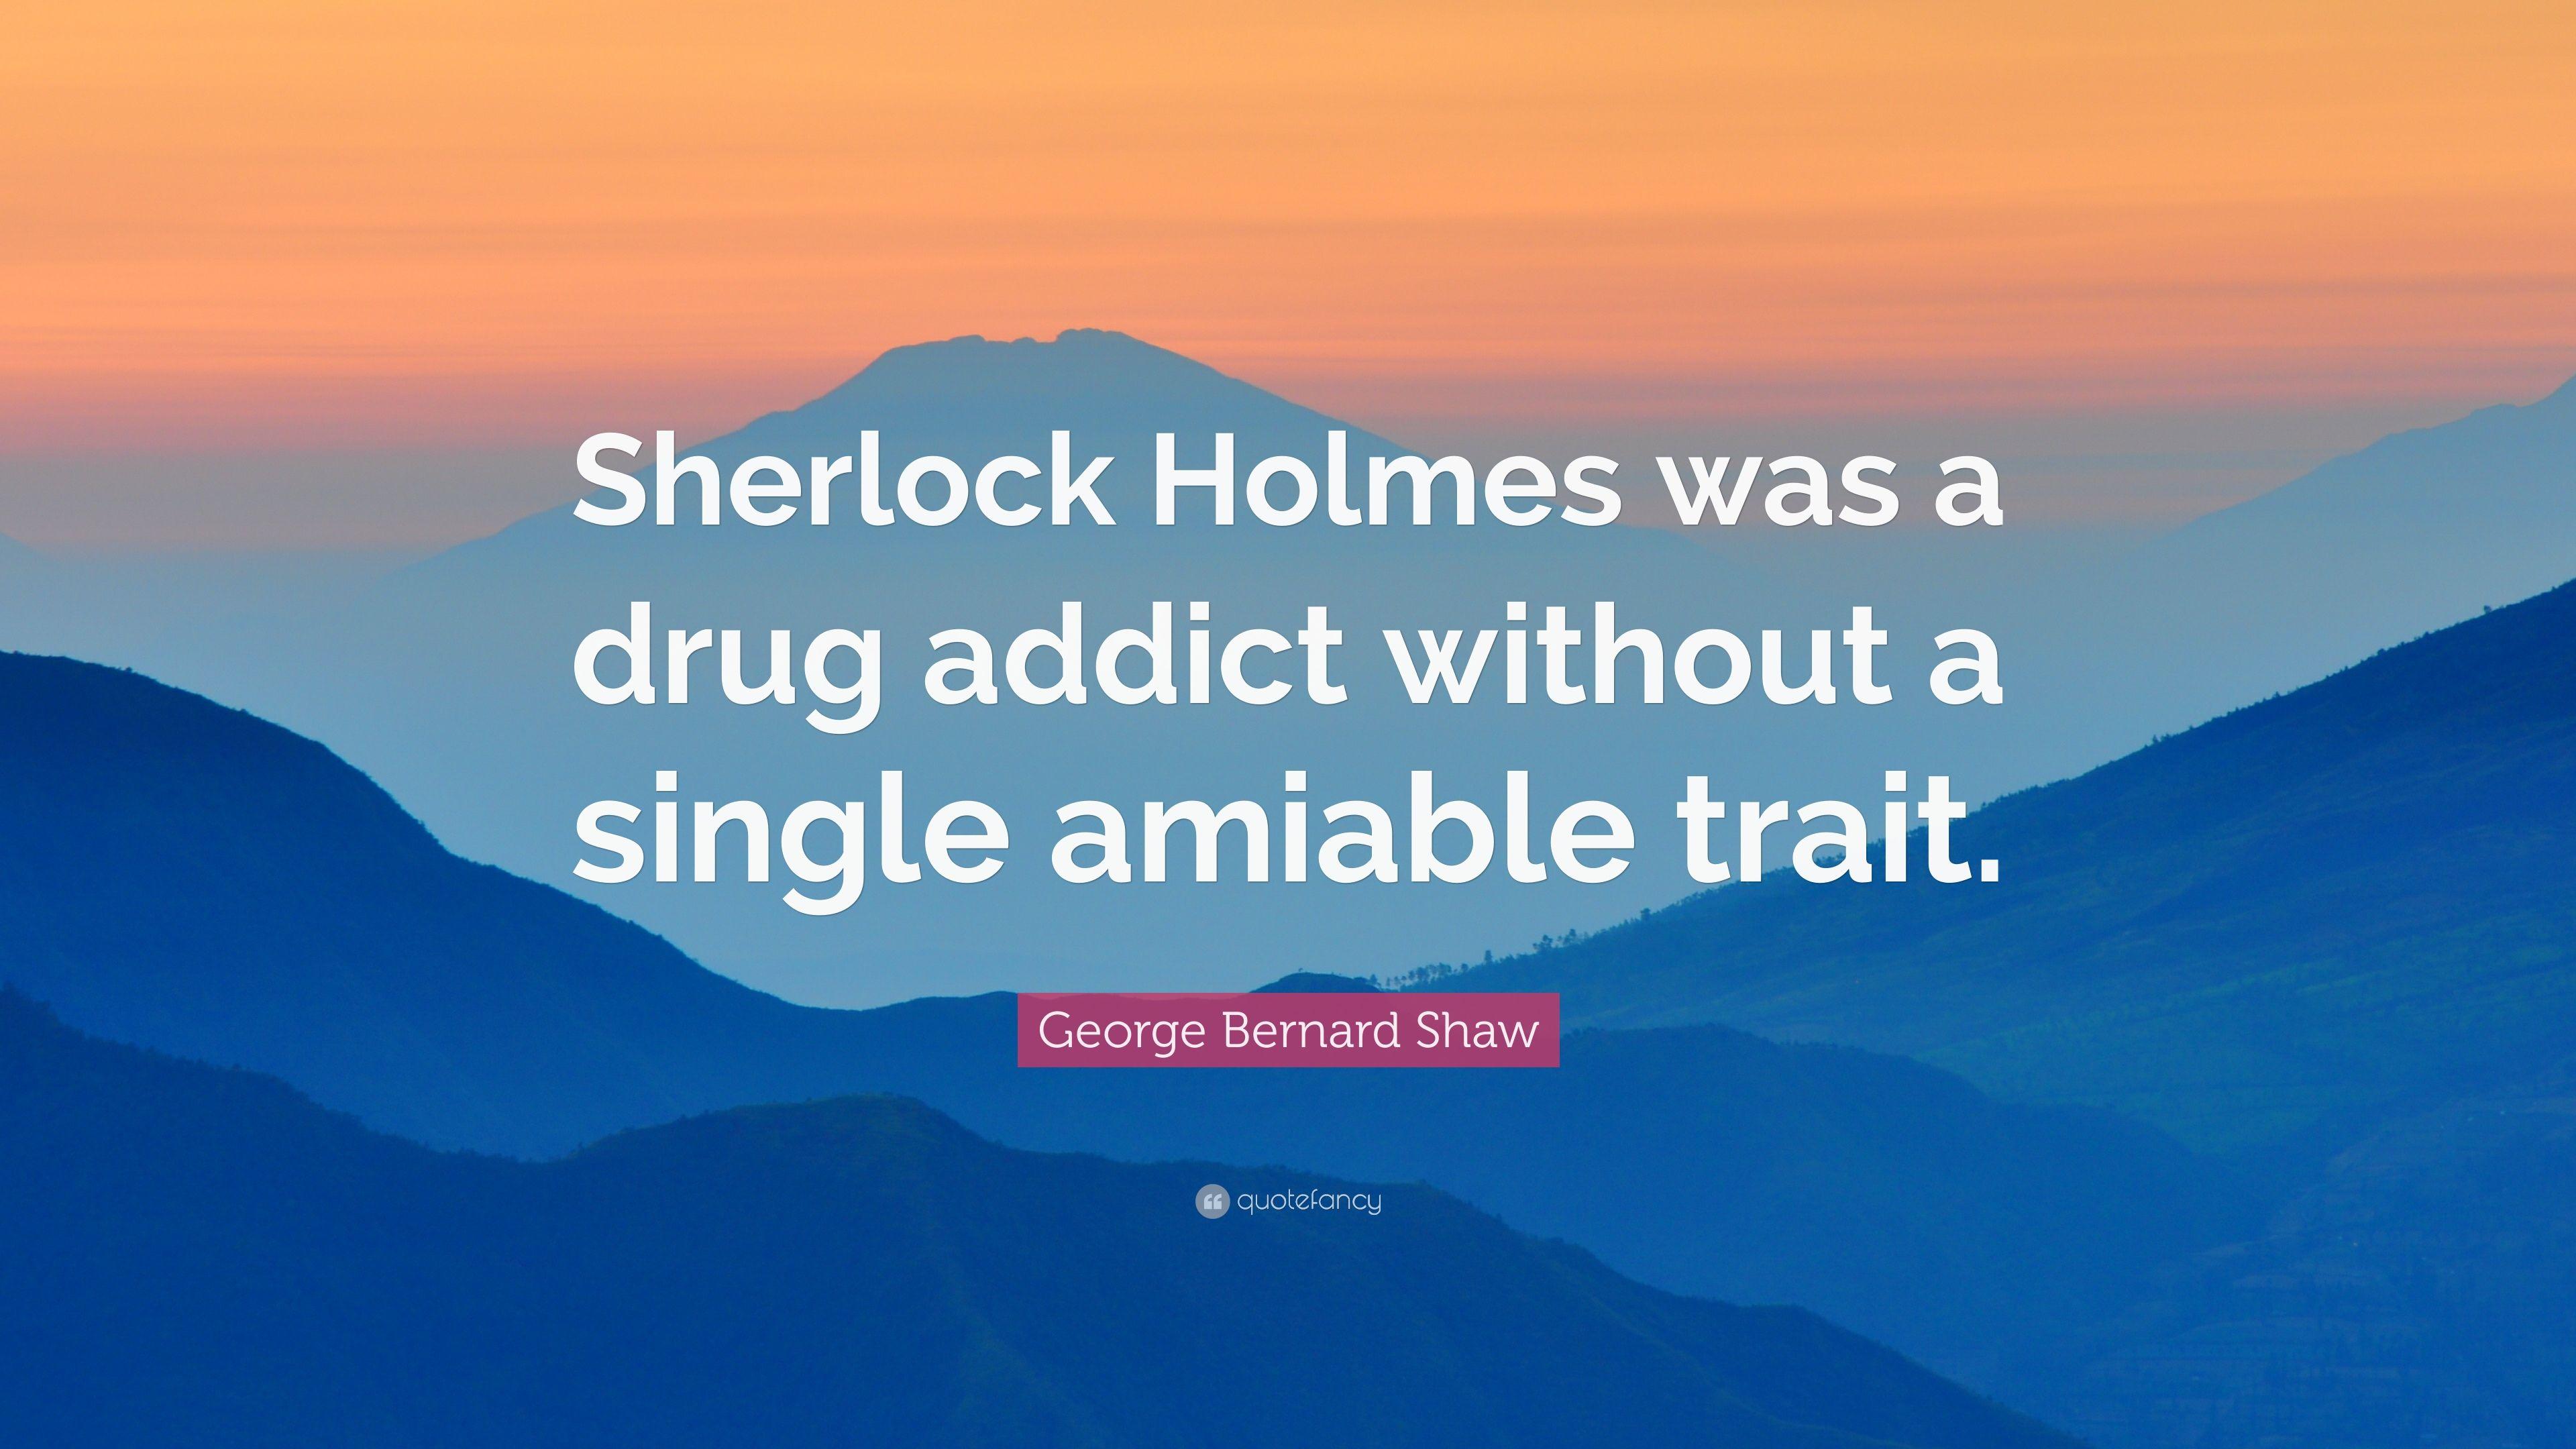 George Bernard Shaw Quote: “Sherlock Holmes was a drug addict without a single amiable trait.” (10 wallpaper)